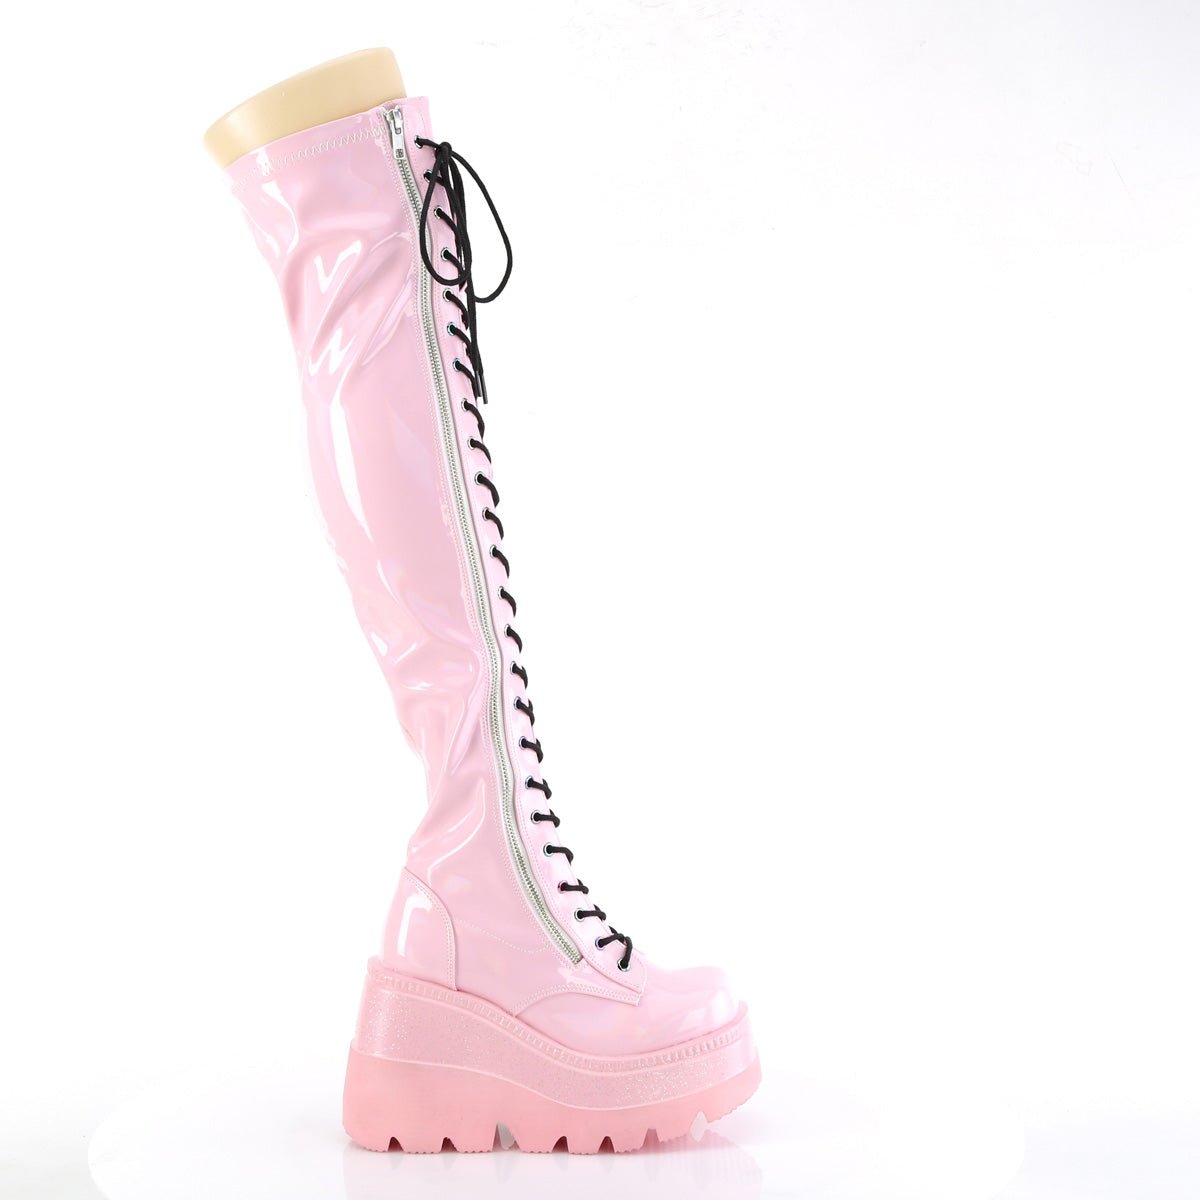 Too Fast | Demonia Shaker 374 | Baby Pink Hologram Stretch Patent Leather Women&#39;s Over The Knee Boots